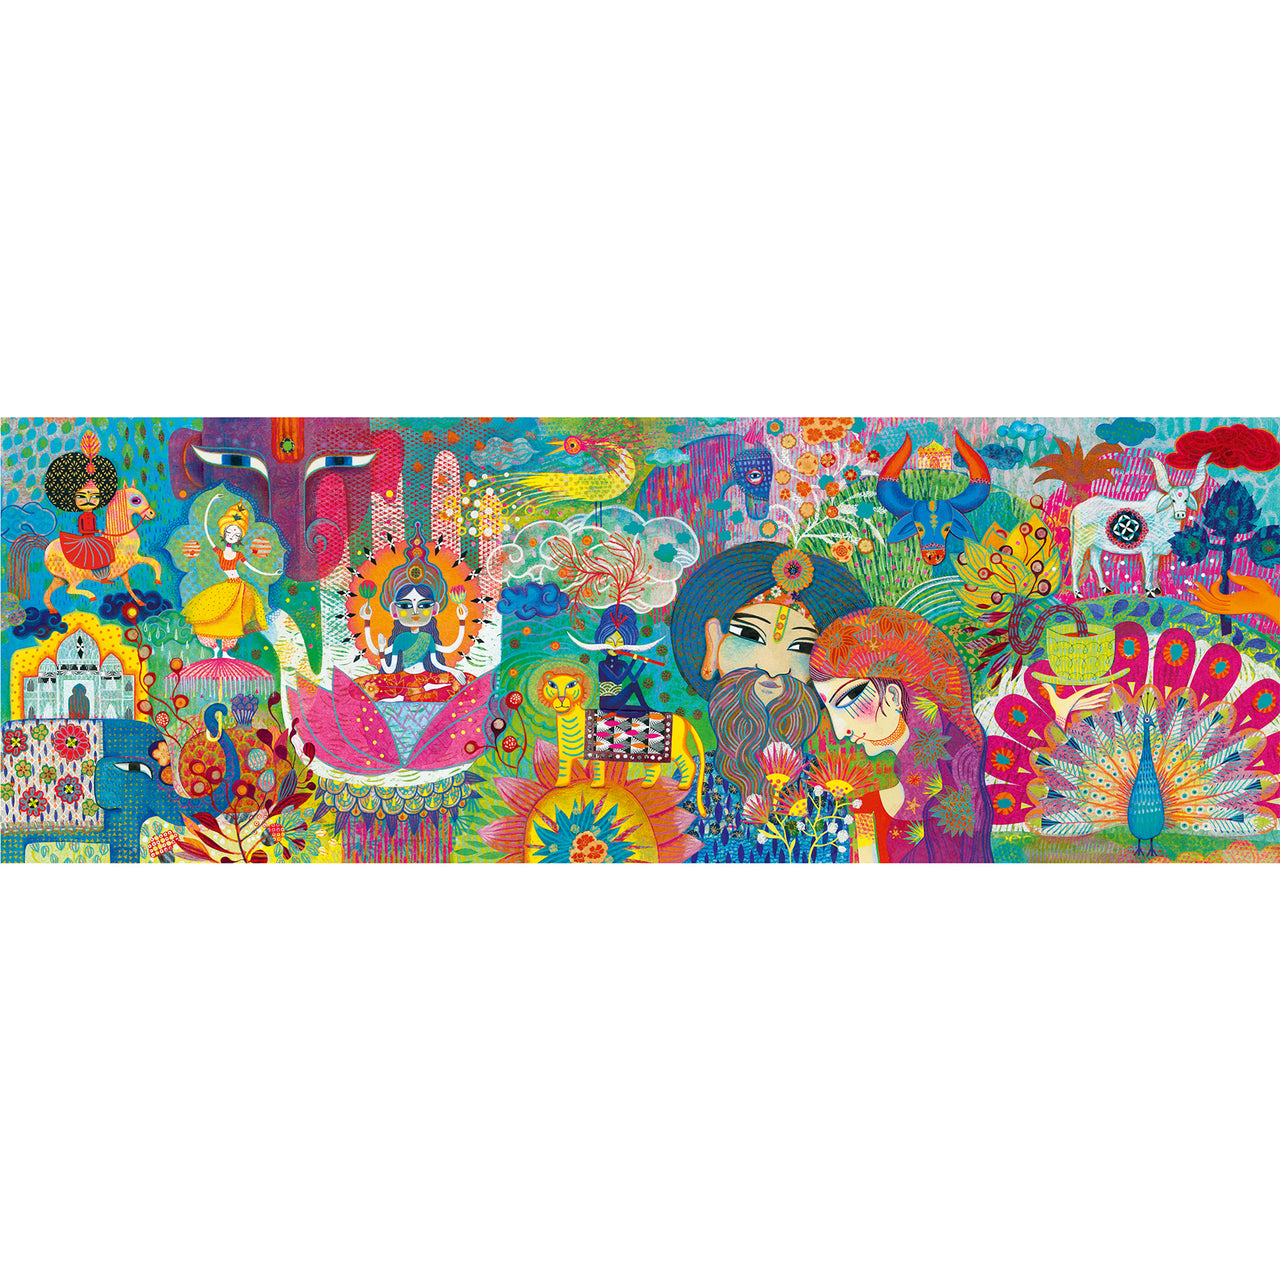 Magic India is a 1000-piece puzzle gallery showing the vibrant colours and customs of India. Our illustrators went wild with an all-new, super long format! A fun and innovative way of teaching children about painting. 